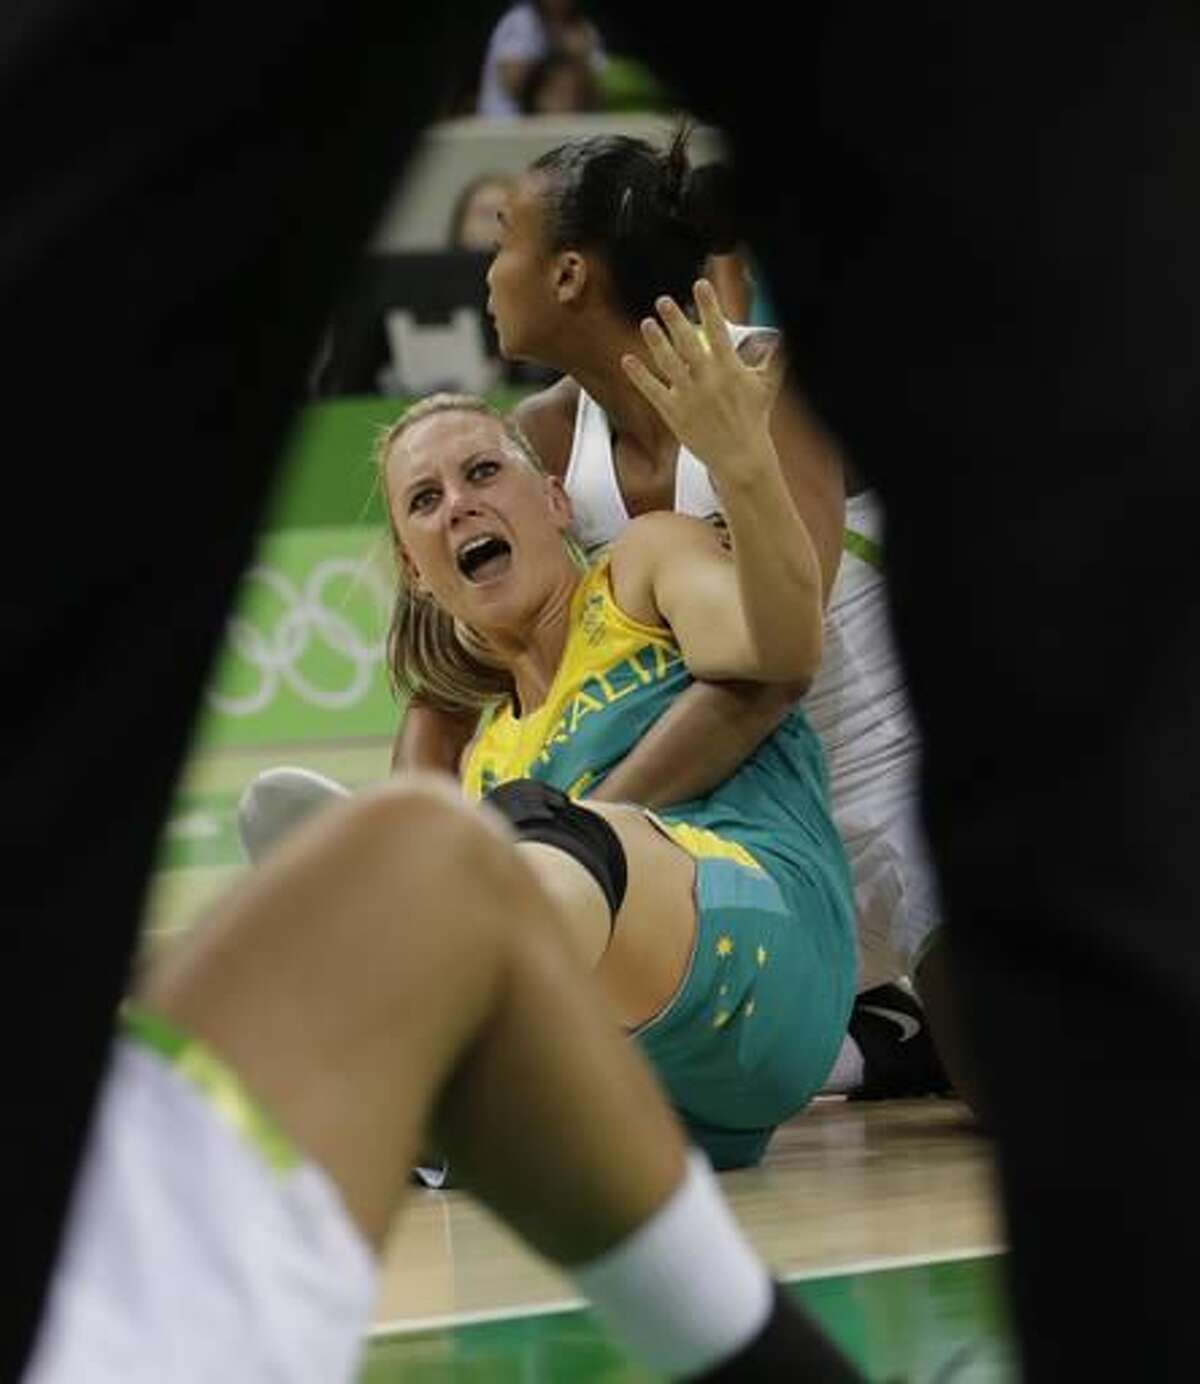 Australia guard Penny Taylor looks for the call from the referee during the first half of a women's basketball game against Brazil at the Youth Center at the 2016 Summer Olympics in Rio de Janeiro, Brazil, Saturday, Aug. 6, 2016. (AP Photo/Carlos Osorio)